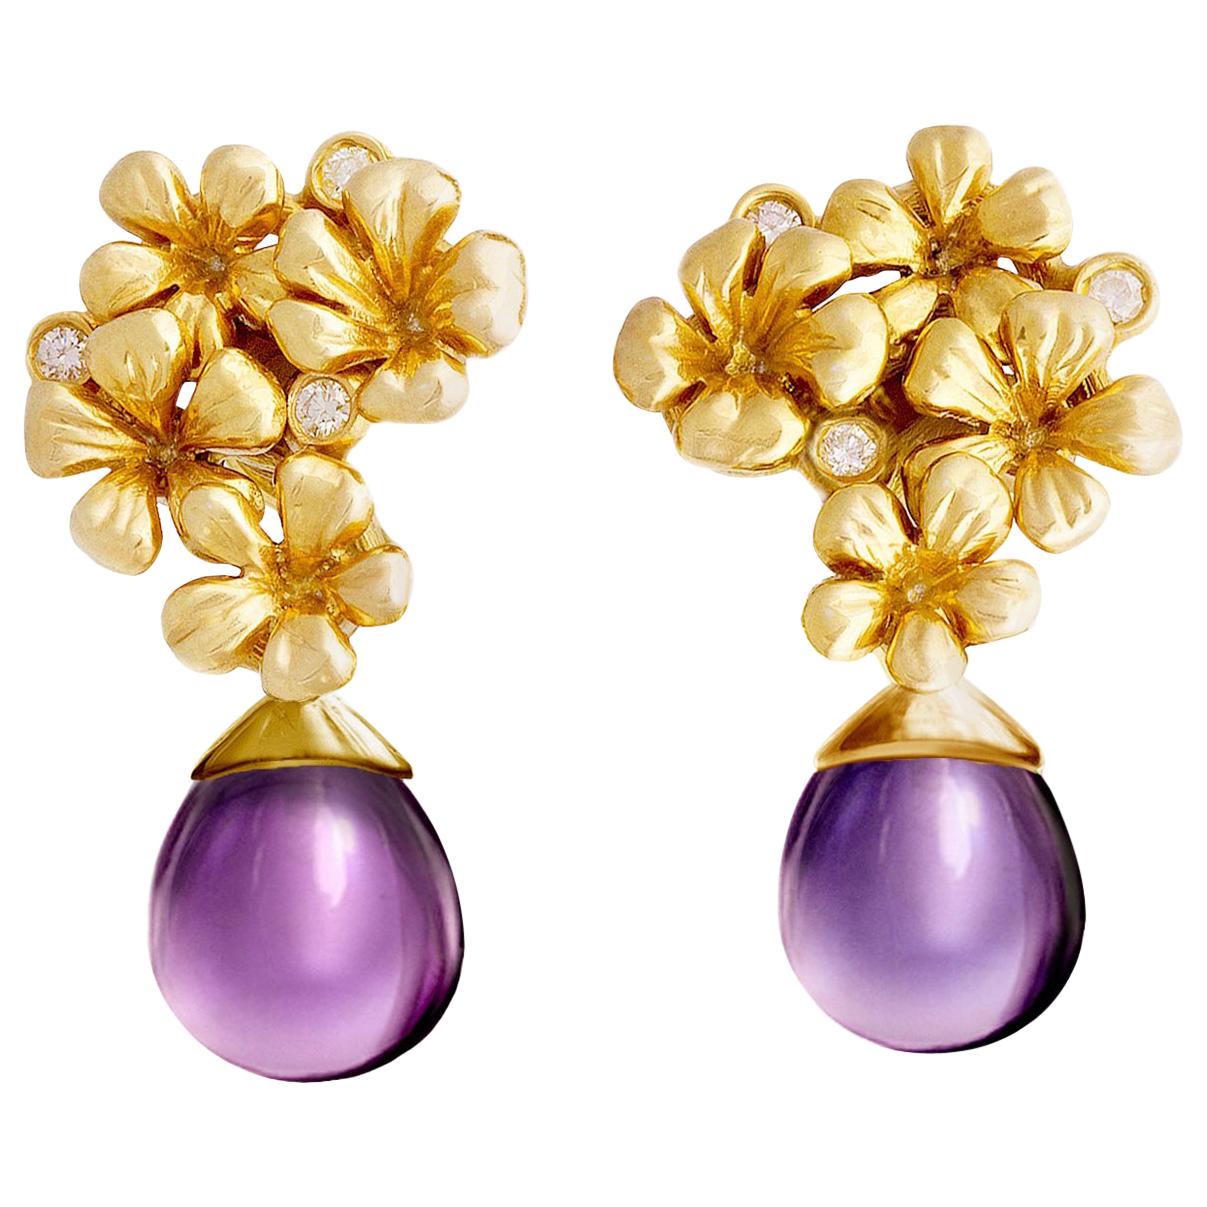 Fourteen Karat Gold Plum Flowers Clip-on Earrings with Diamonds and Amethyst